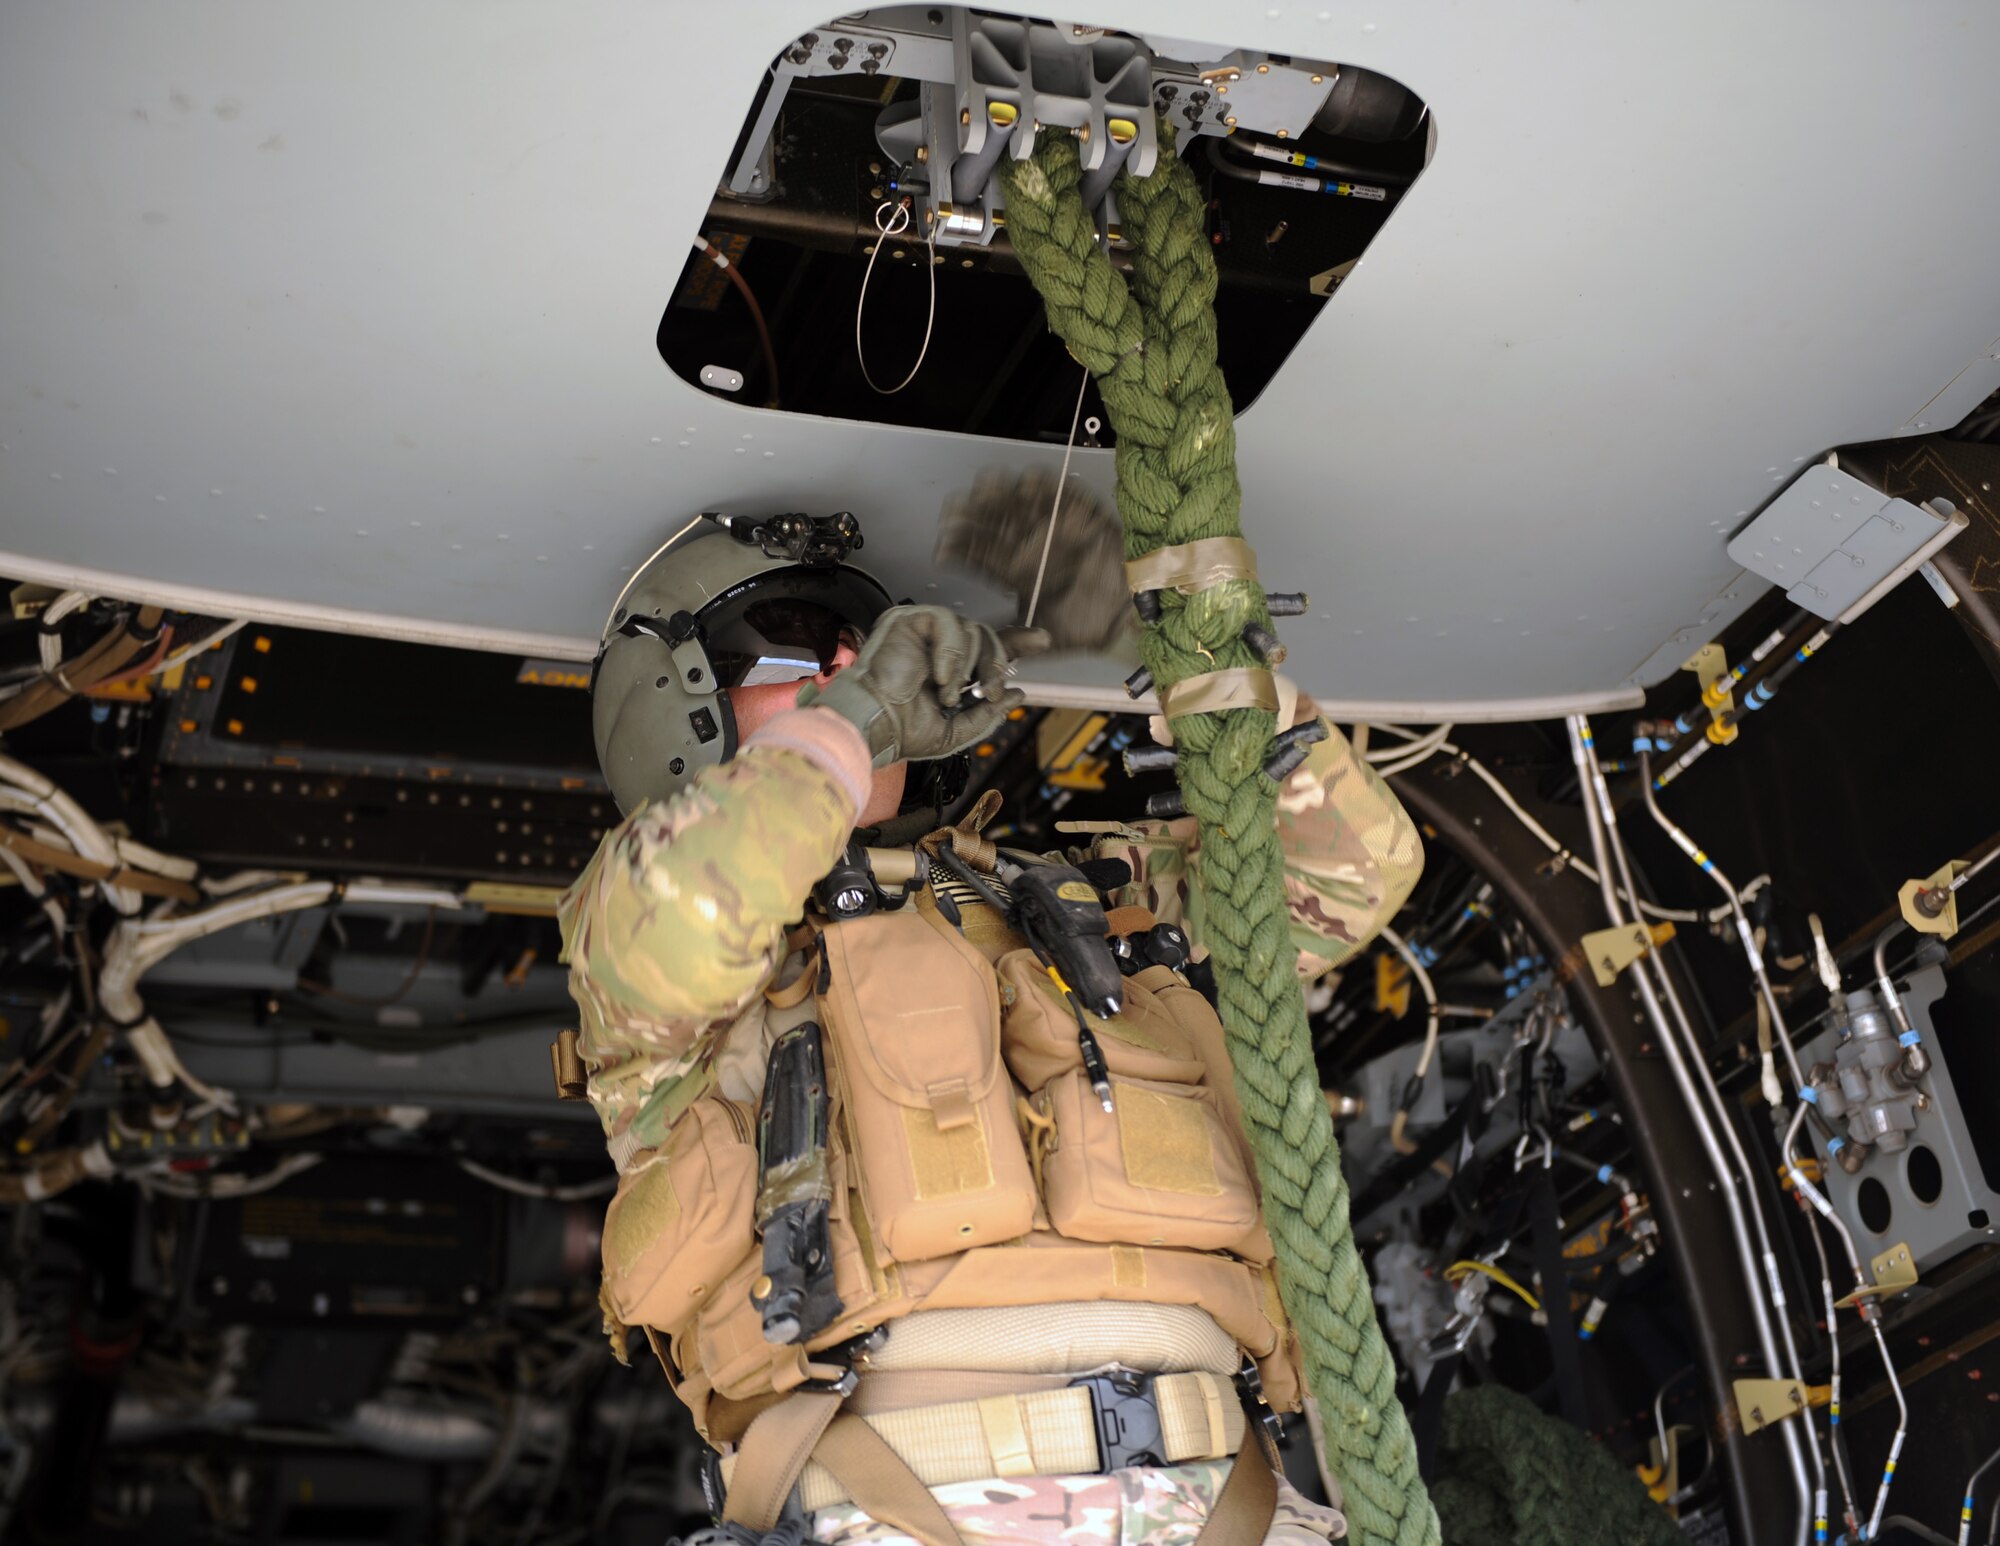 U.S. Air Force Senior Master Sgt. Erik Davis, 7th Special Operations Squadron CV-22B Osprey special mission aviator, connects the heavy rope prior to the Special Tactics Airmen who will infiltrate an area during training using the Fast Rope Insertion Extraction System, March 25, 2015, at RAF Sculthorpe in Norfolk, England. (U.S. Air Force photo by Tech. Sgt. Stacia Zachary)